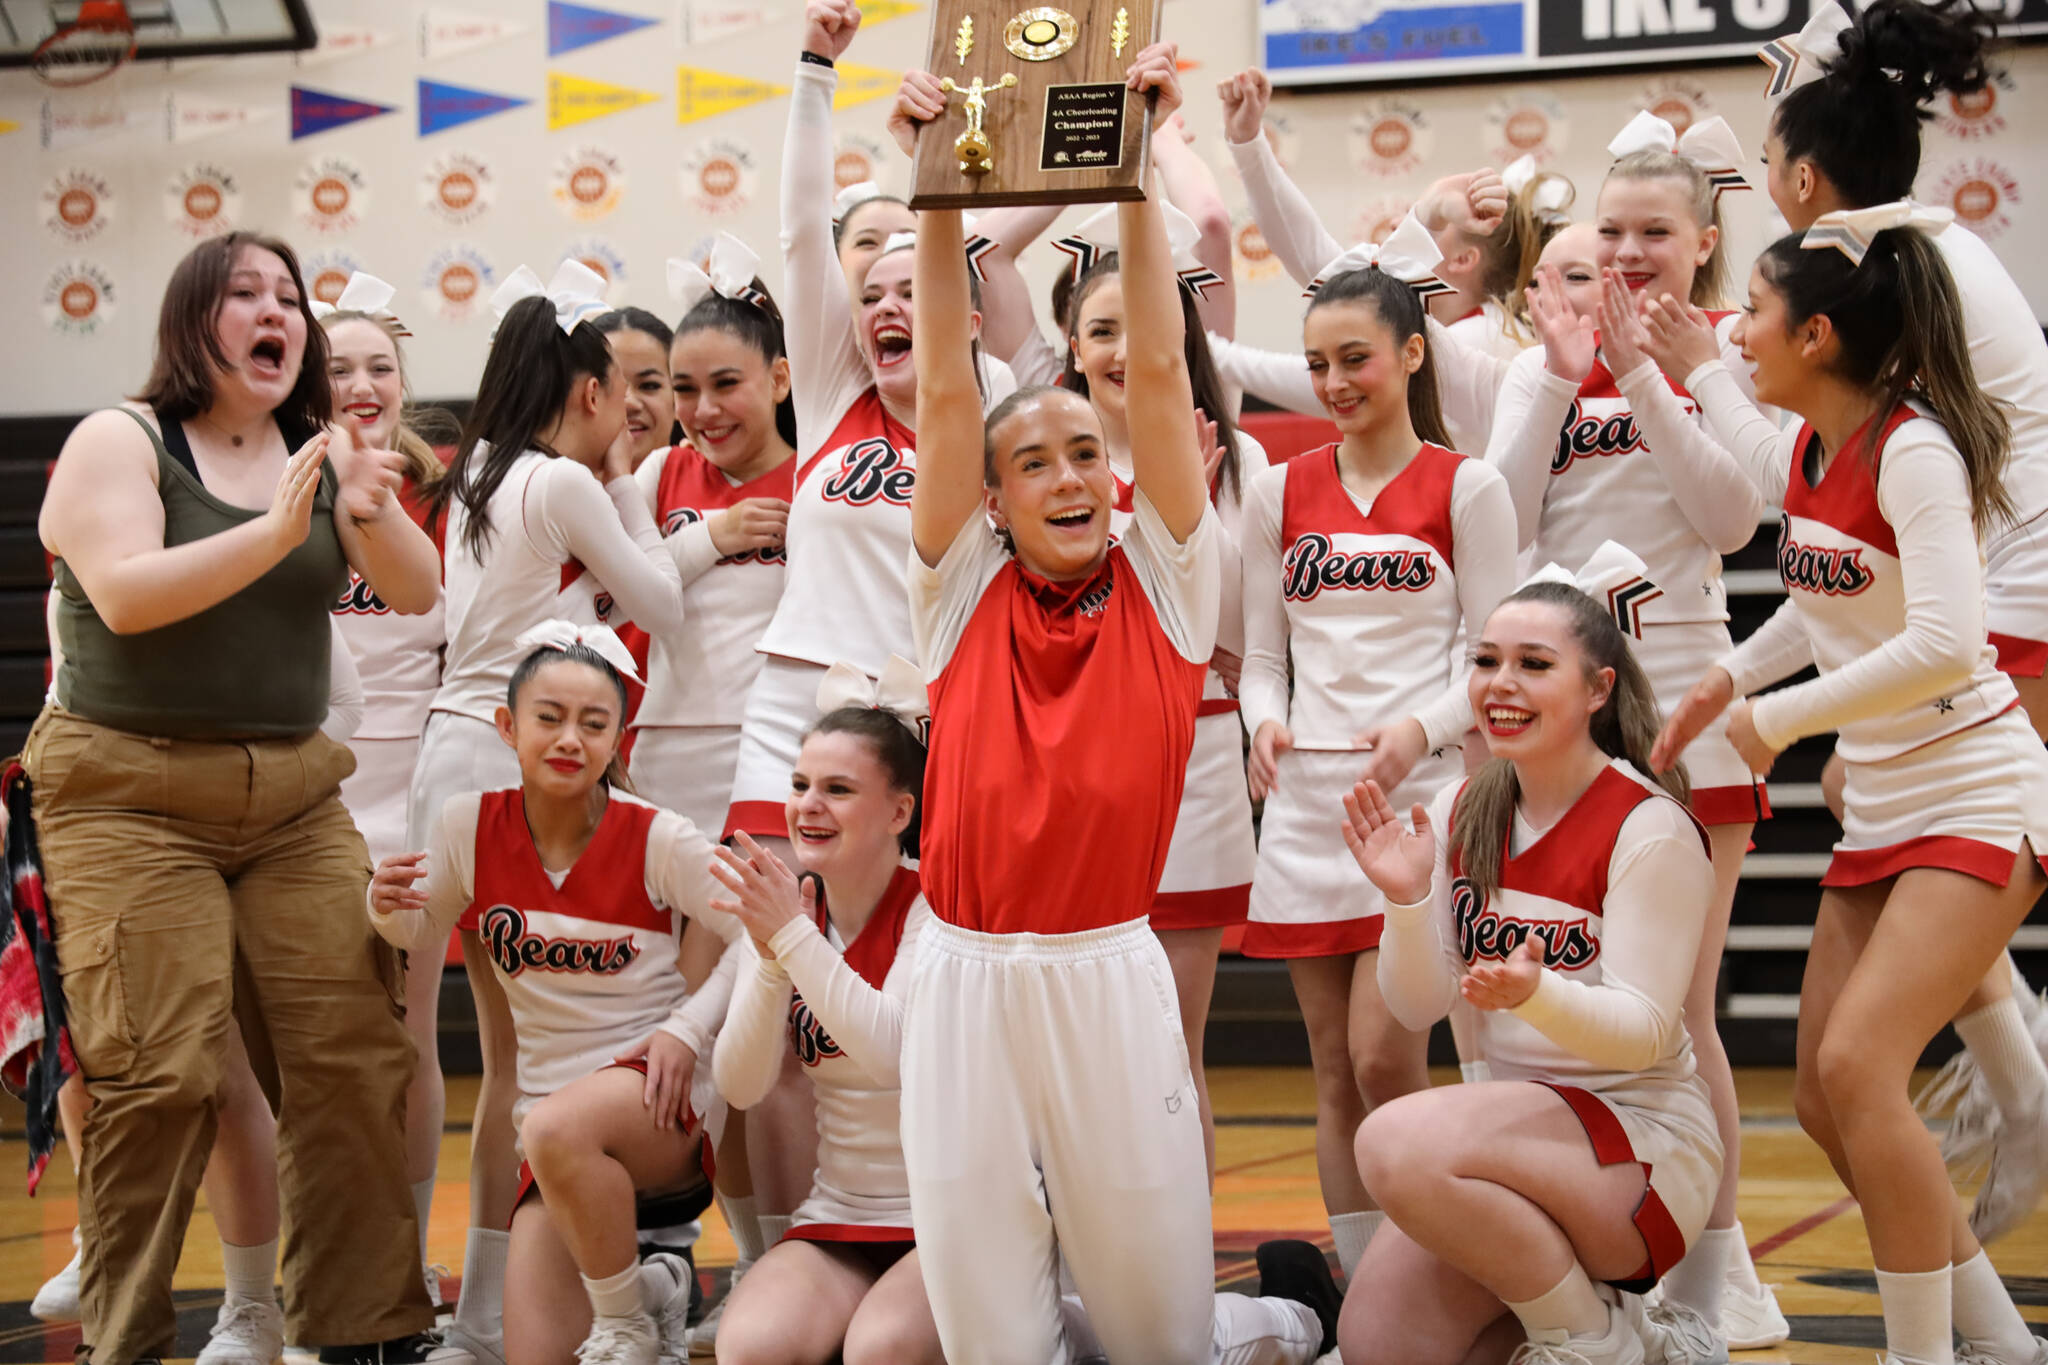 Emotions were high as JDHS cheer takes home the 4A division championship title for the third year in a row during the annual Region V 2A/4A dance adjudication competition hosted at Juneau-Douglas High School:Yadaa.at Kalé Saturday afternoon. (Clarise Larson / Juneau Empire)